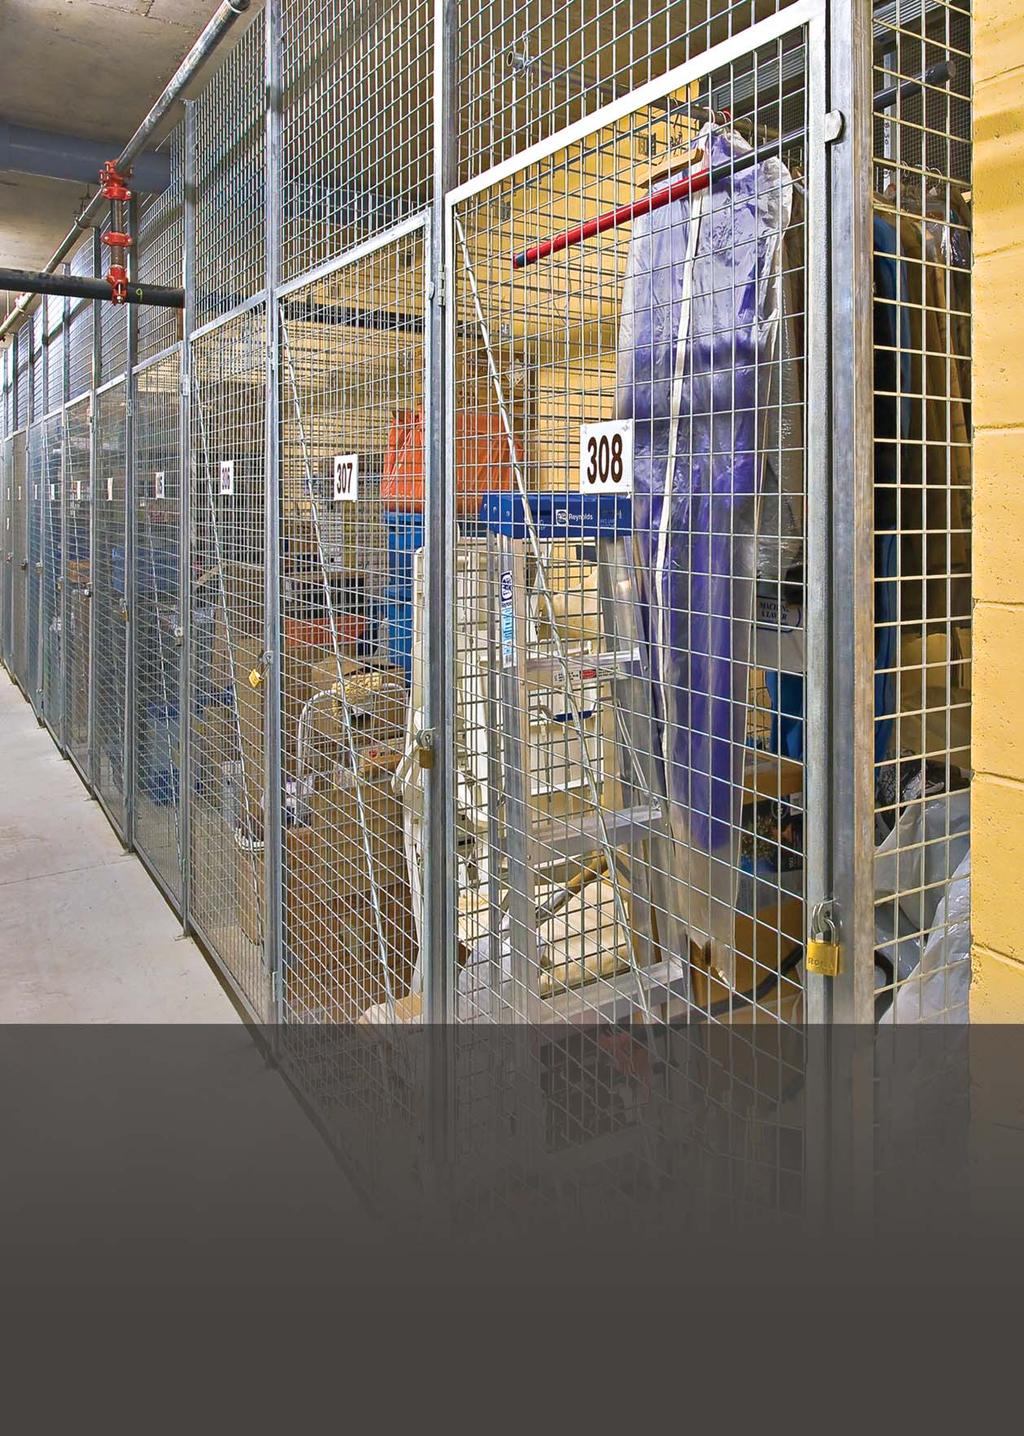 CoganCondo Lockers When compared to dry wall, wood and other wire products, our Econo-Fence provides more of everything you need a clean, attractive